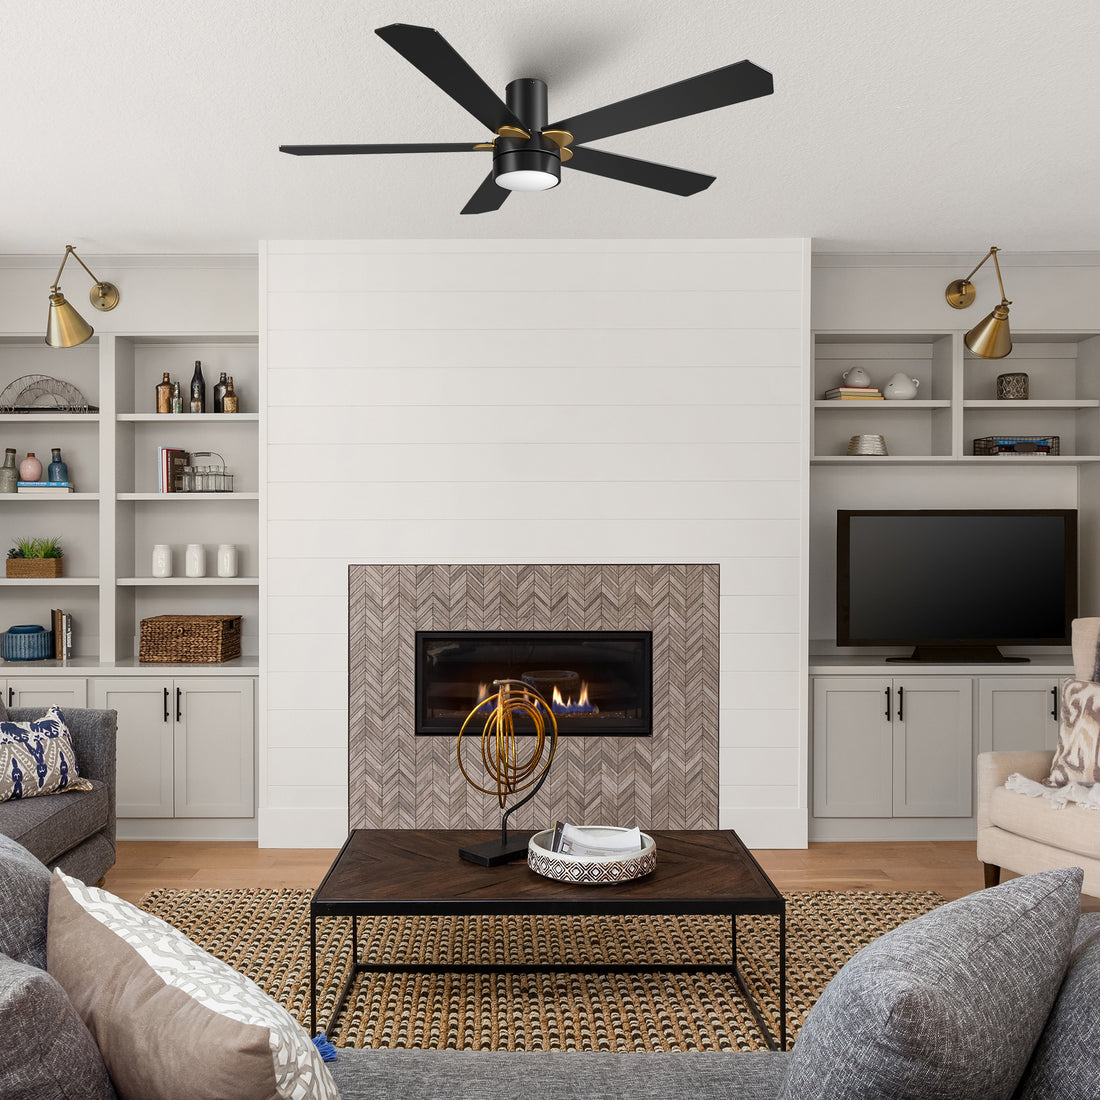 This Harlem 52&quot; smart ceiling fan keeps your space cool, bright, and stylish. It is a soft modern masterpiece perfect for your large indoor living spaces. This Wifi smart ceiling fan is a simplicity designing with Black finish, use elegant Plywood blades and has an integrated 4000K LED cool light. The fan features Remote control, Wi-Fi apps, Siri Shortcut and Voice control technology (compatible with Amazon Alexa and Google Home Assistant ) to set fan preferences. 